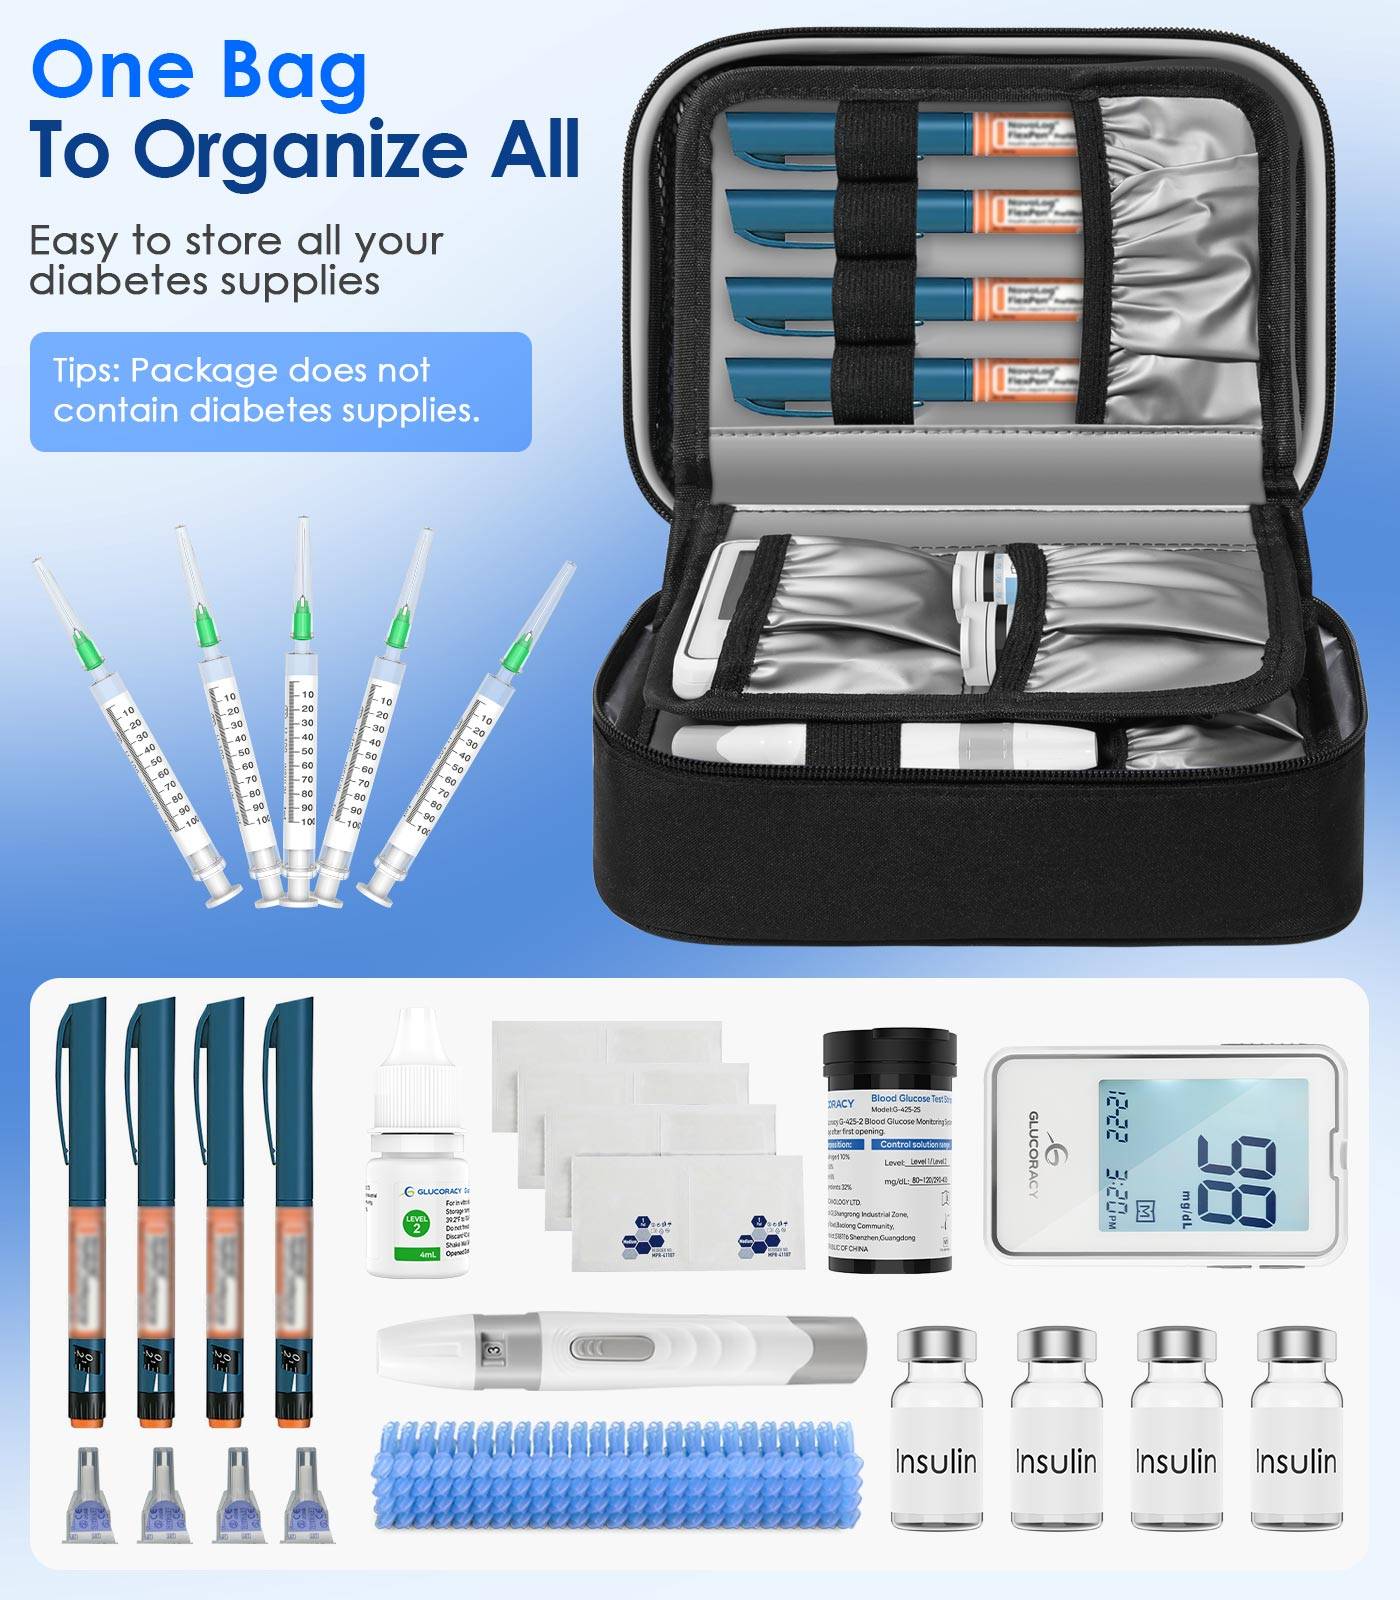 Glucoracy Insulin Cooler Travel Case One Bag Organize All